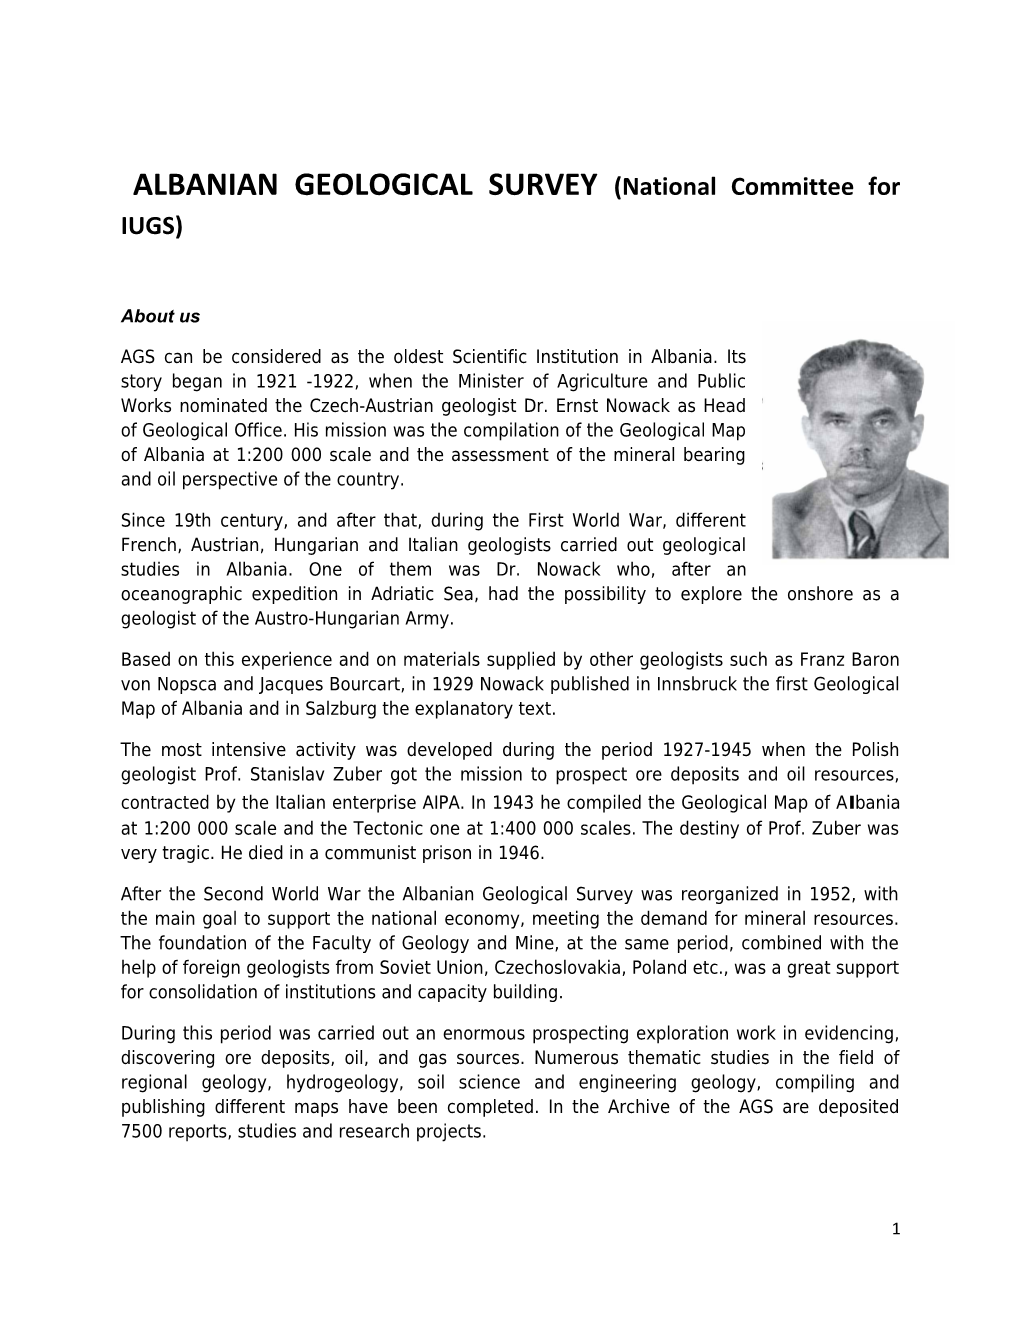 ALBANIAN GEOLOGICAL SURVEY (National Committee for IUGS)